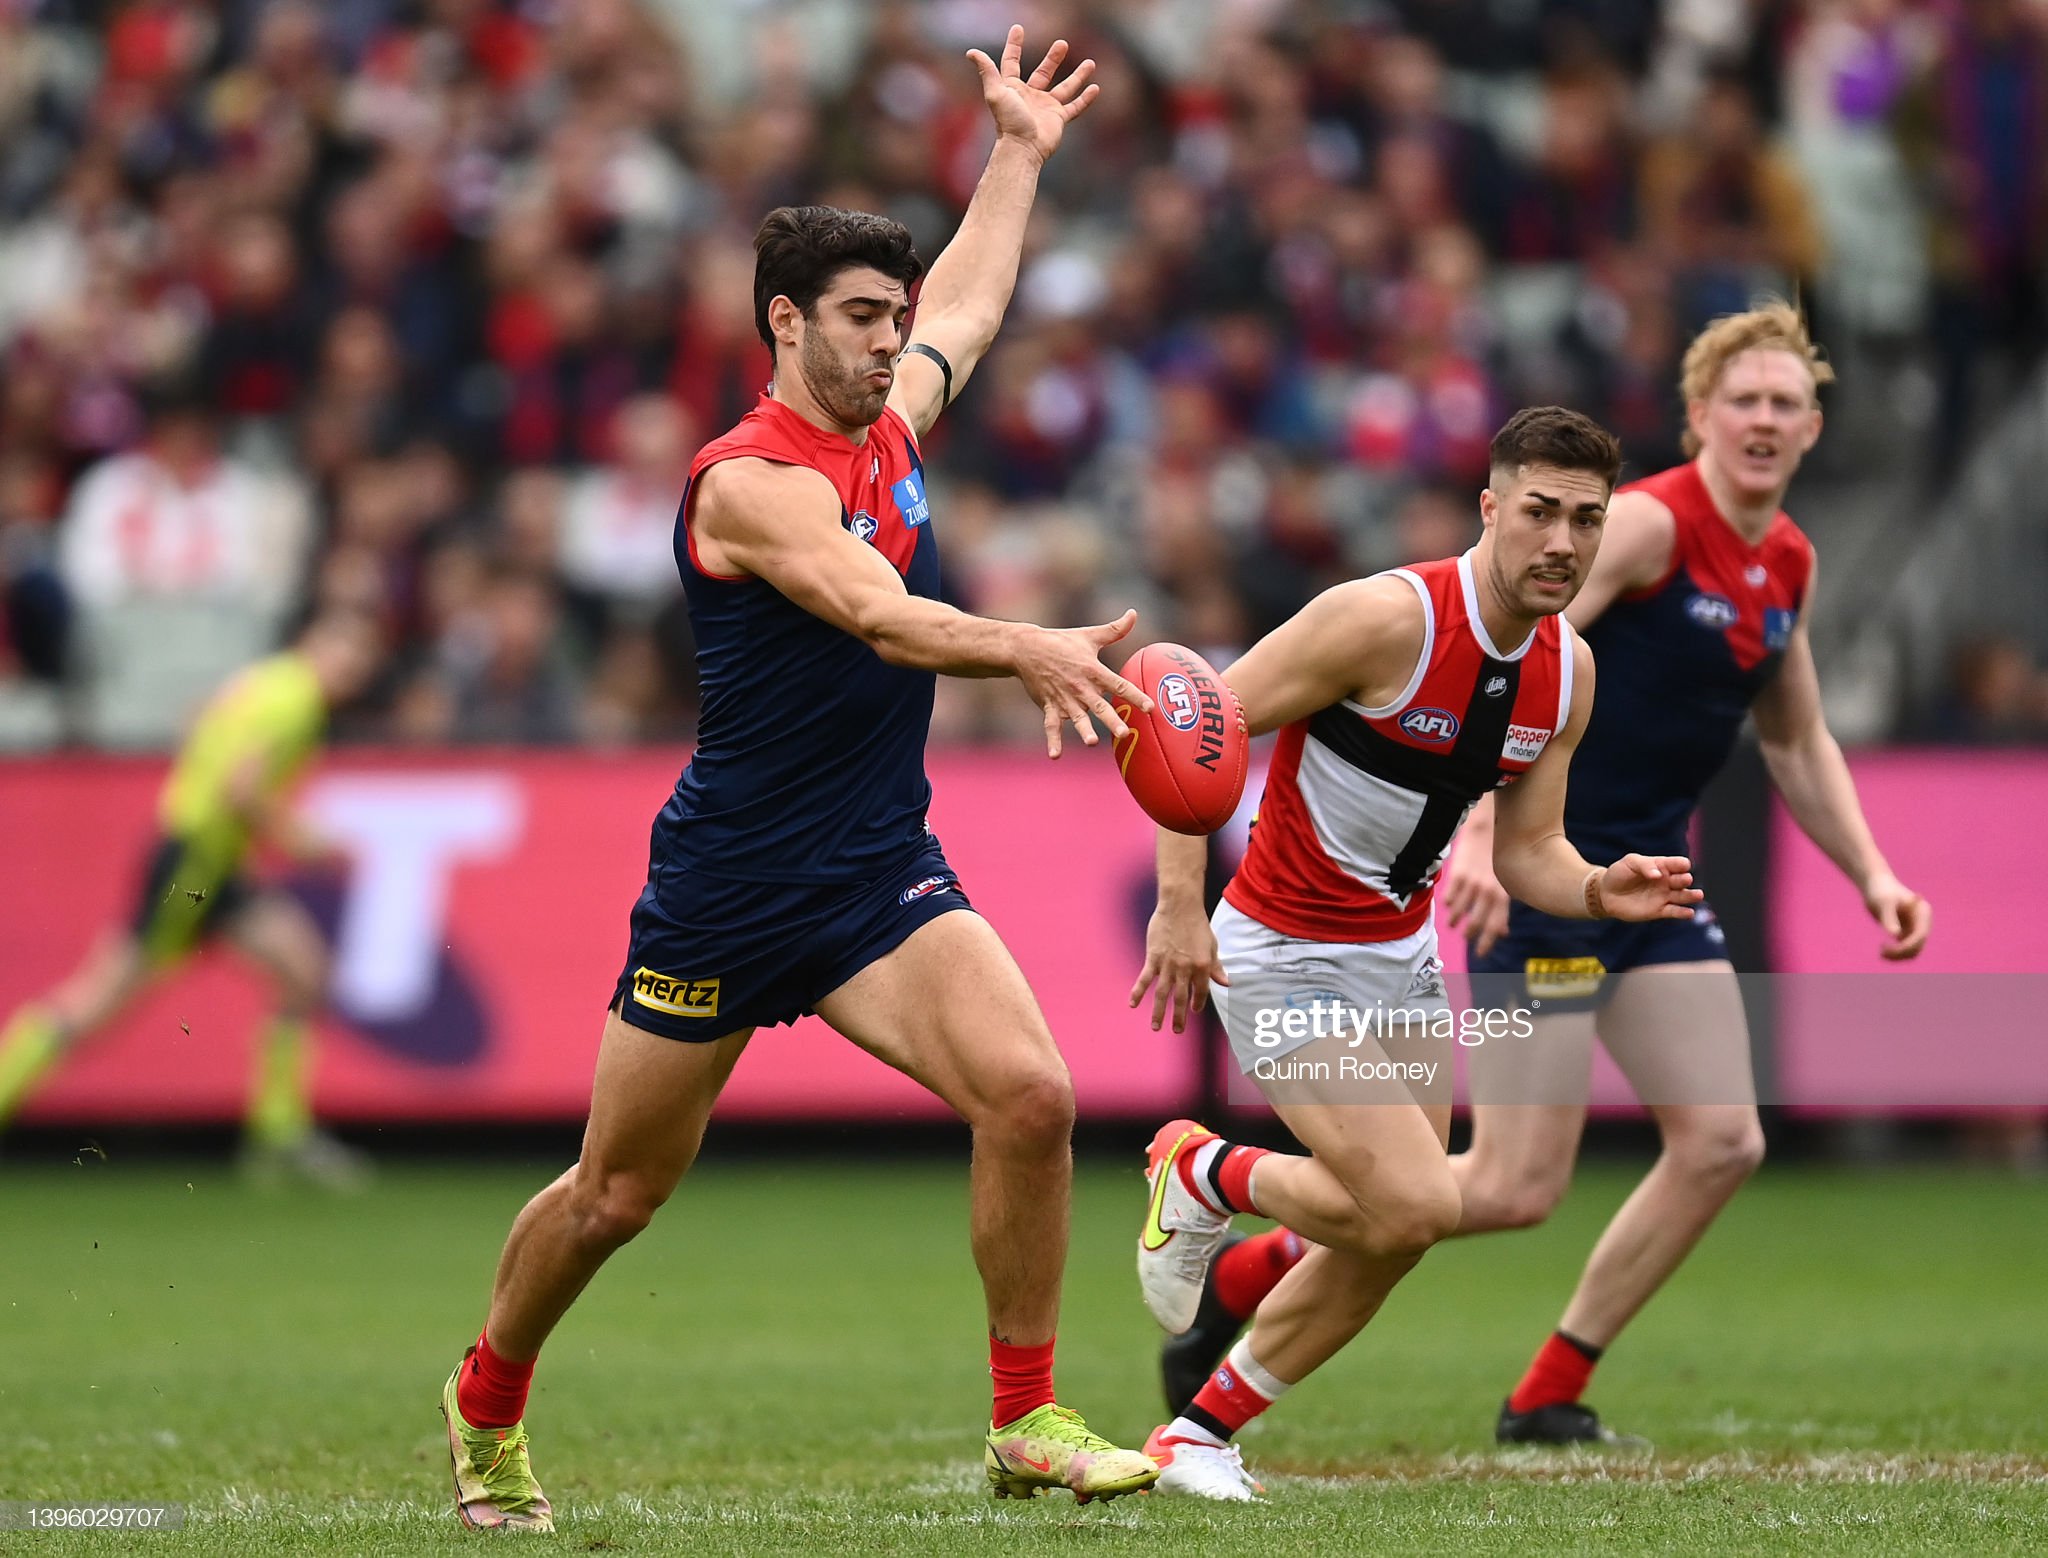 christian-petracca-of-the-demons-kicks-during-the-round-eight-afl-picture-id1396029707